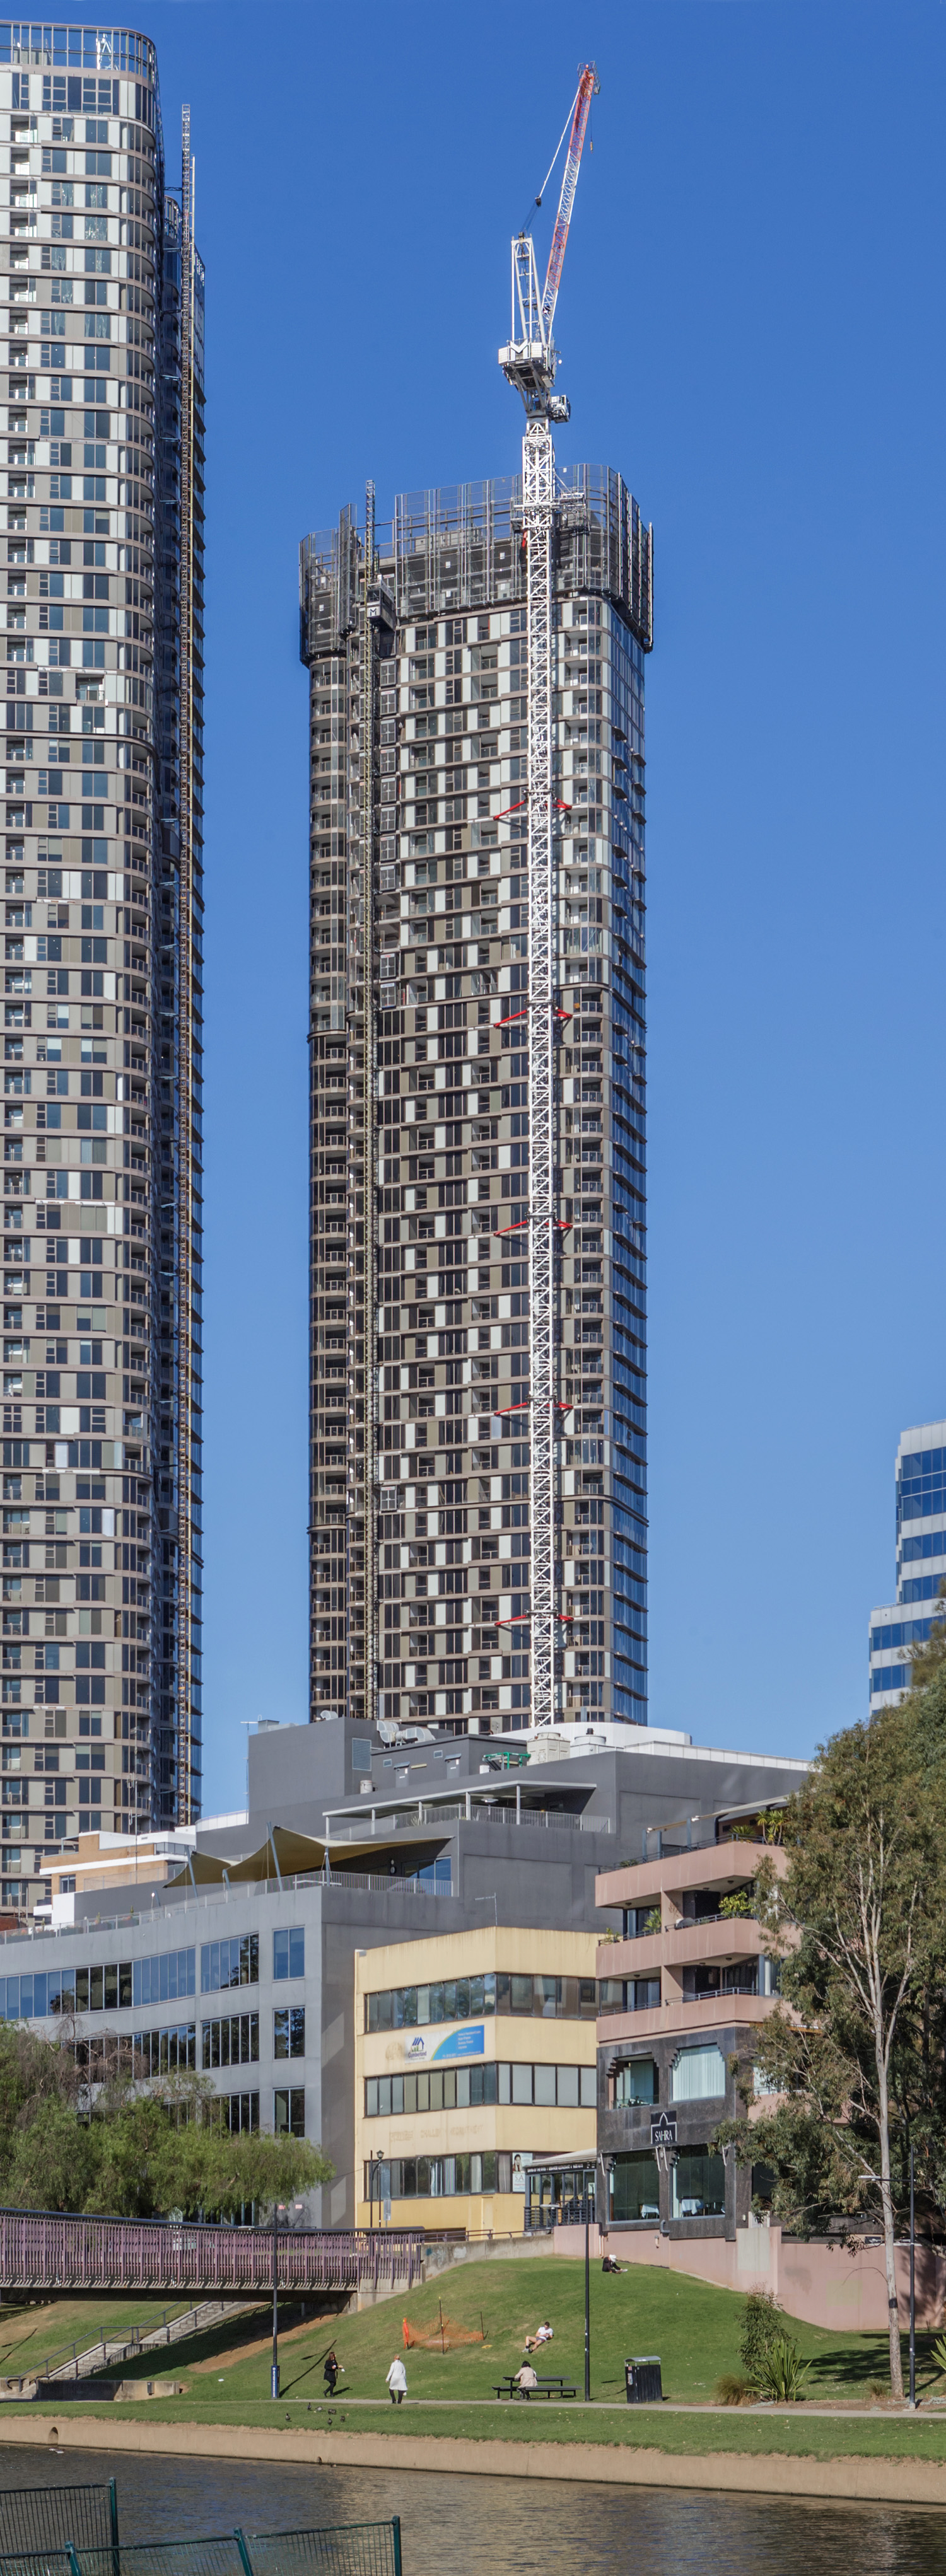 180 George South Tower, Parramatta - View from the northwest. © Mathias Beinling